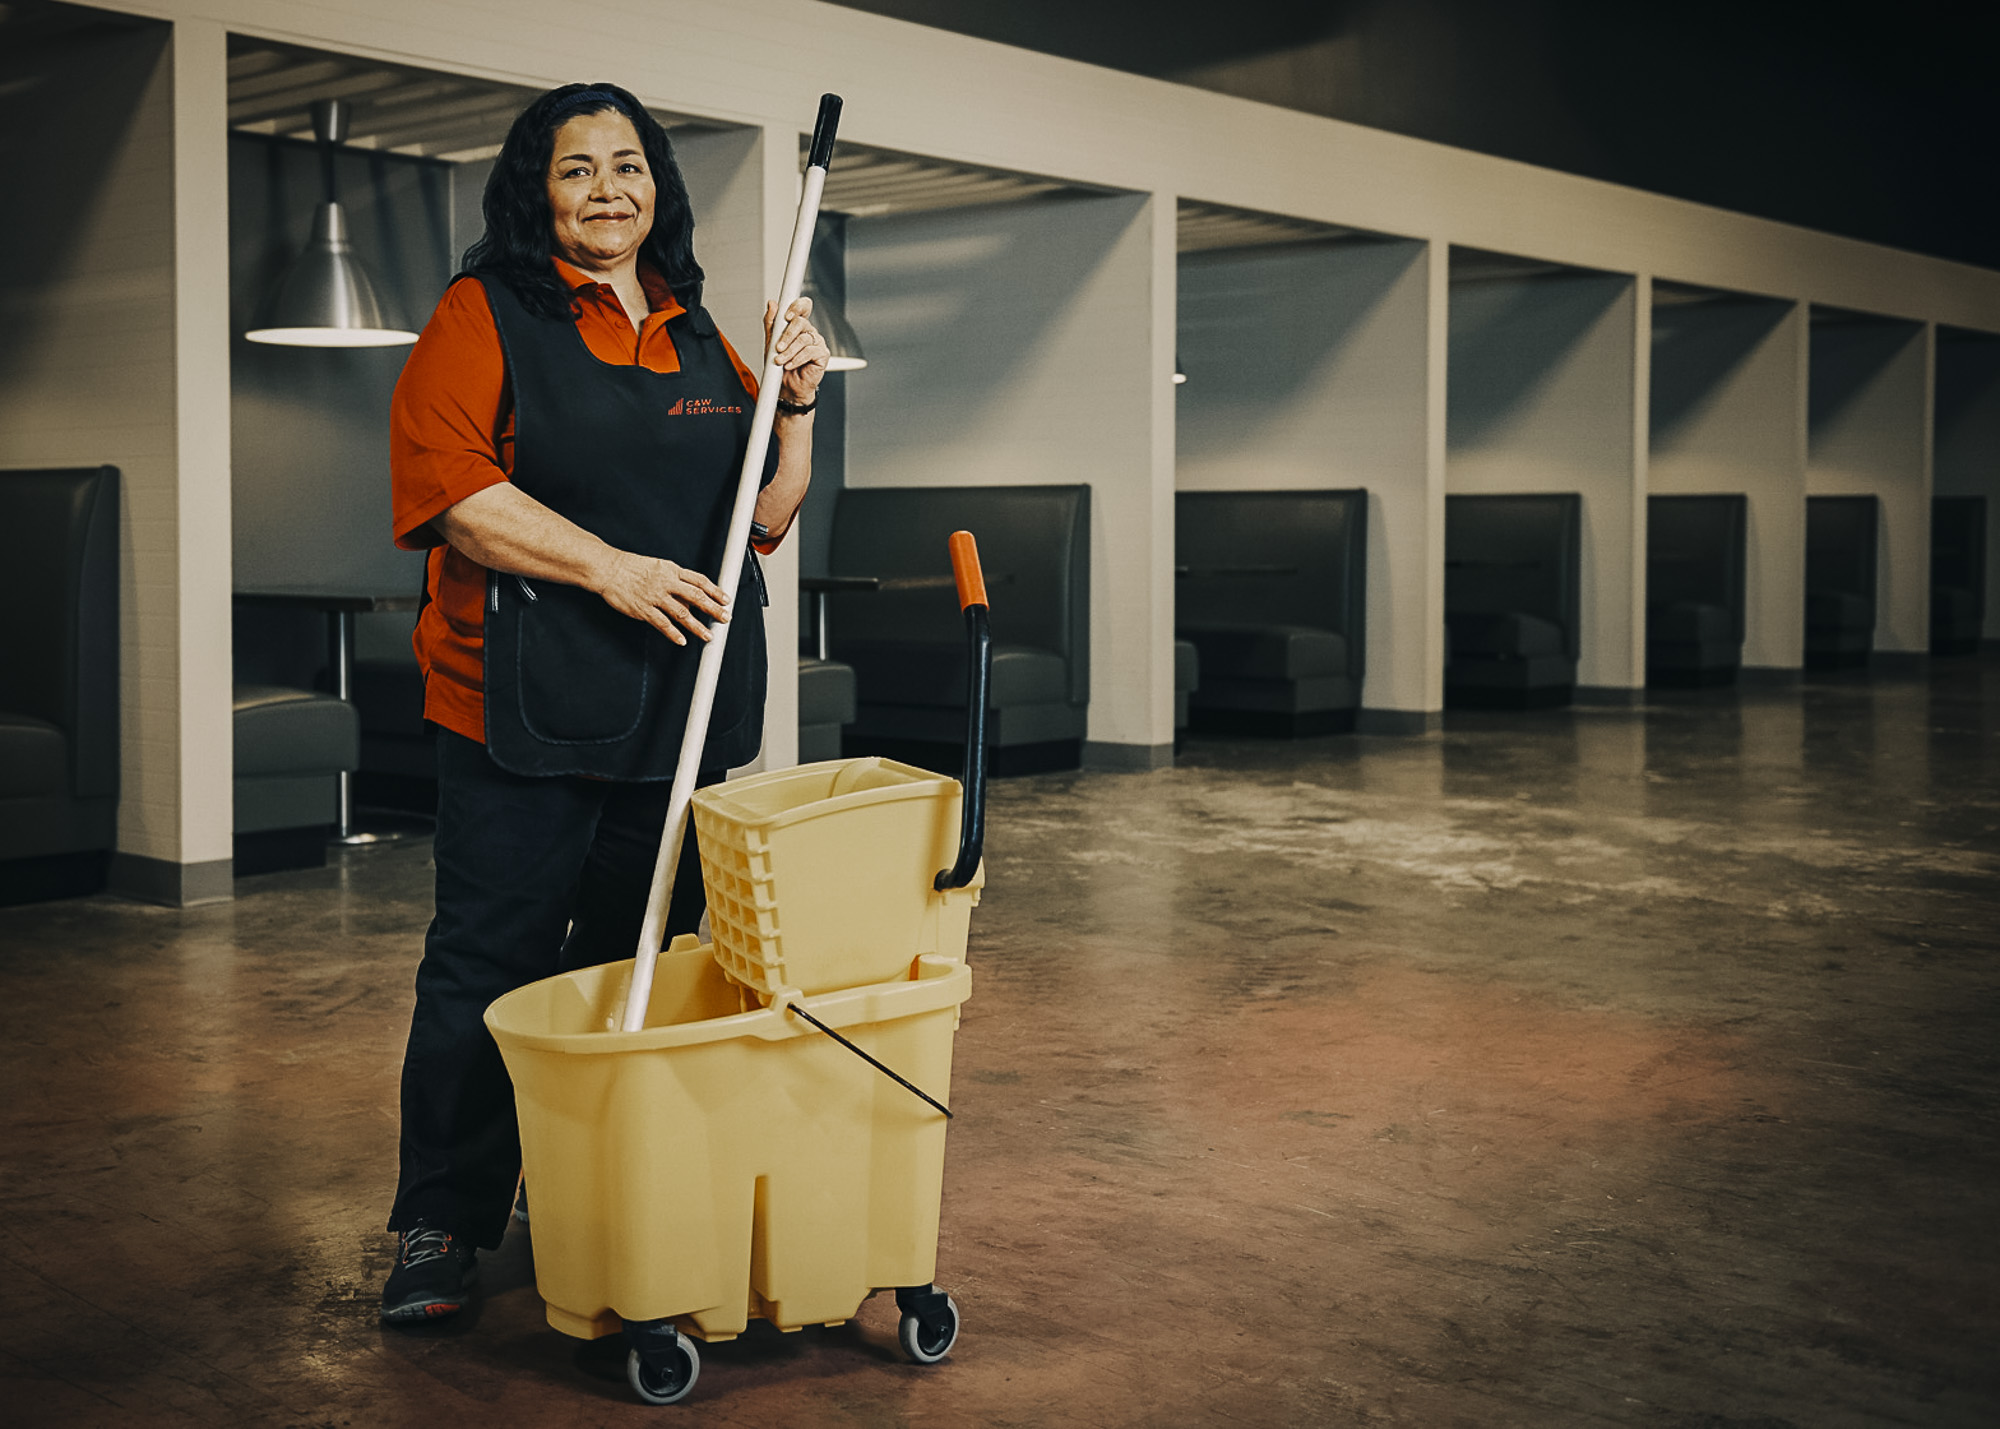 A woman holding a mop and bucket.